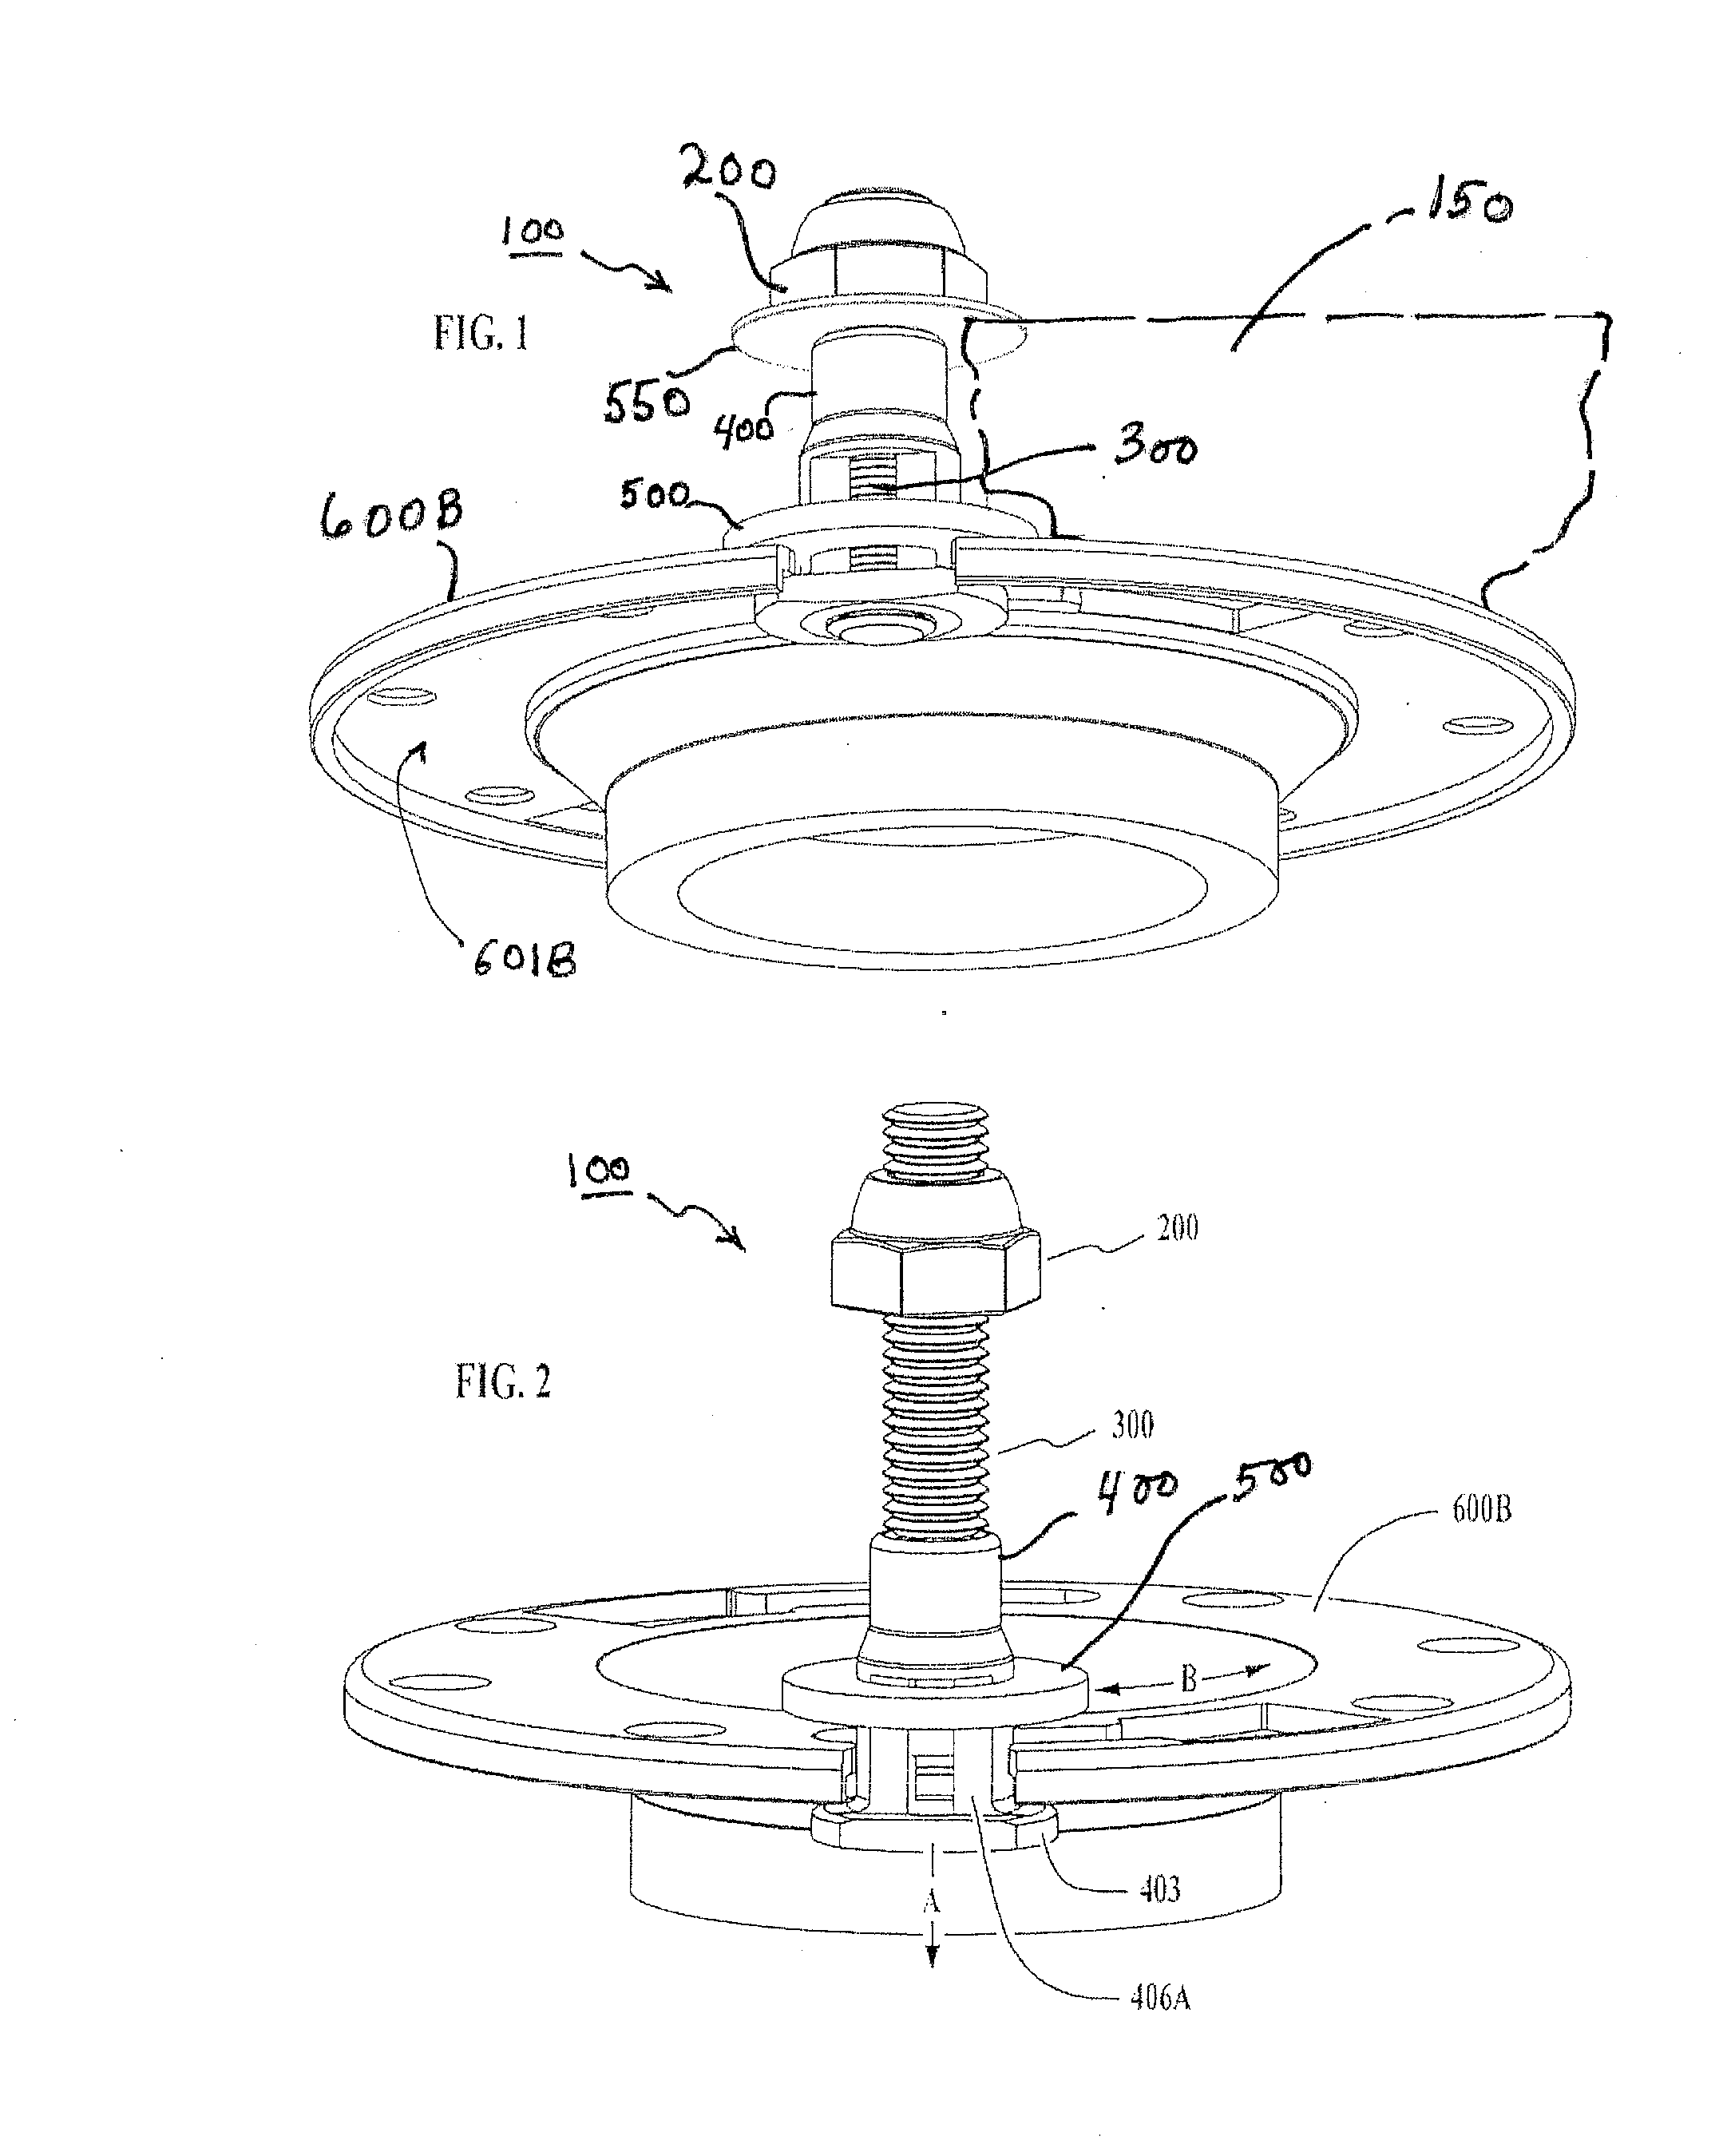 Self adjusting toilet bolt assembly for connecting a toilet bowl to a closet flange